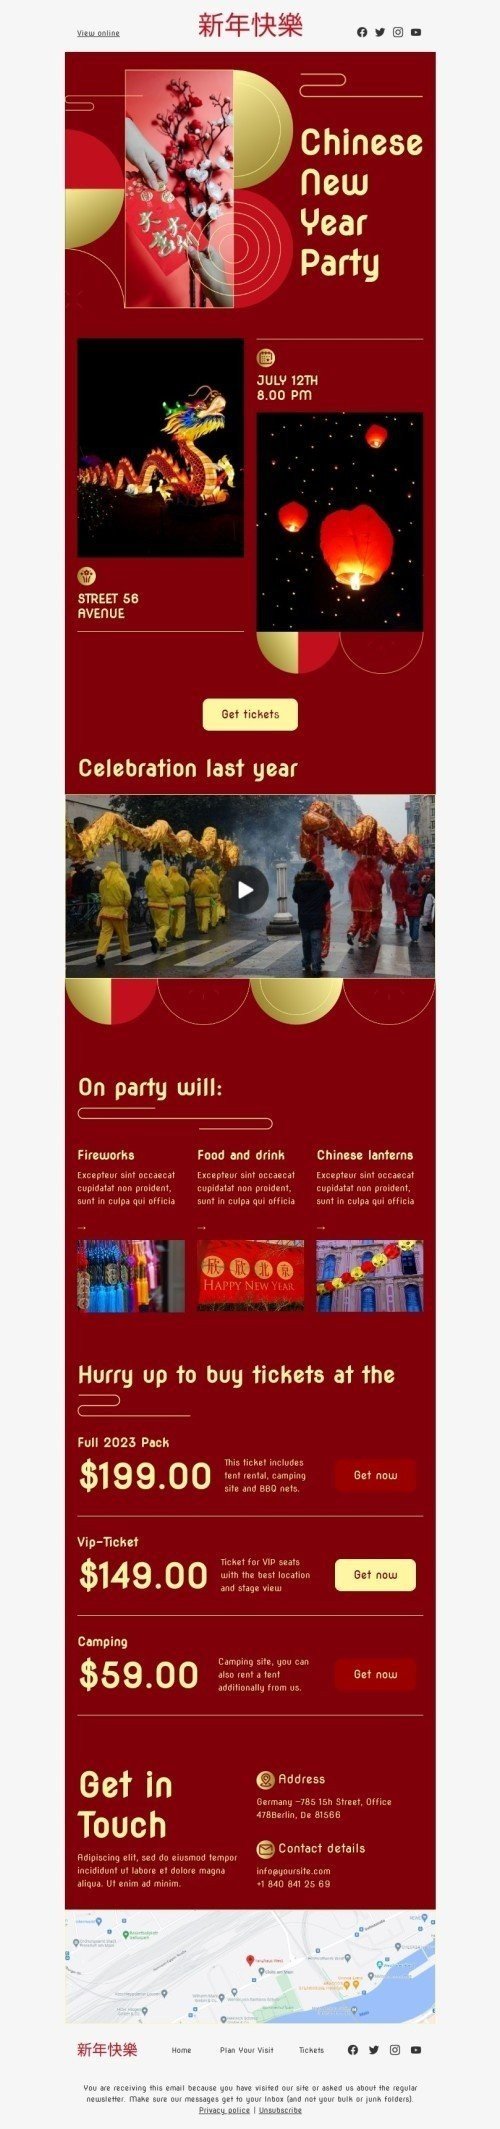 Chinese New Year email template "Chinese New Year party" for hobbies industry desktop view